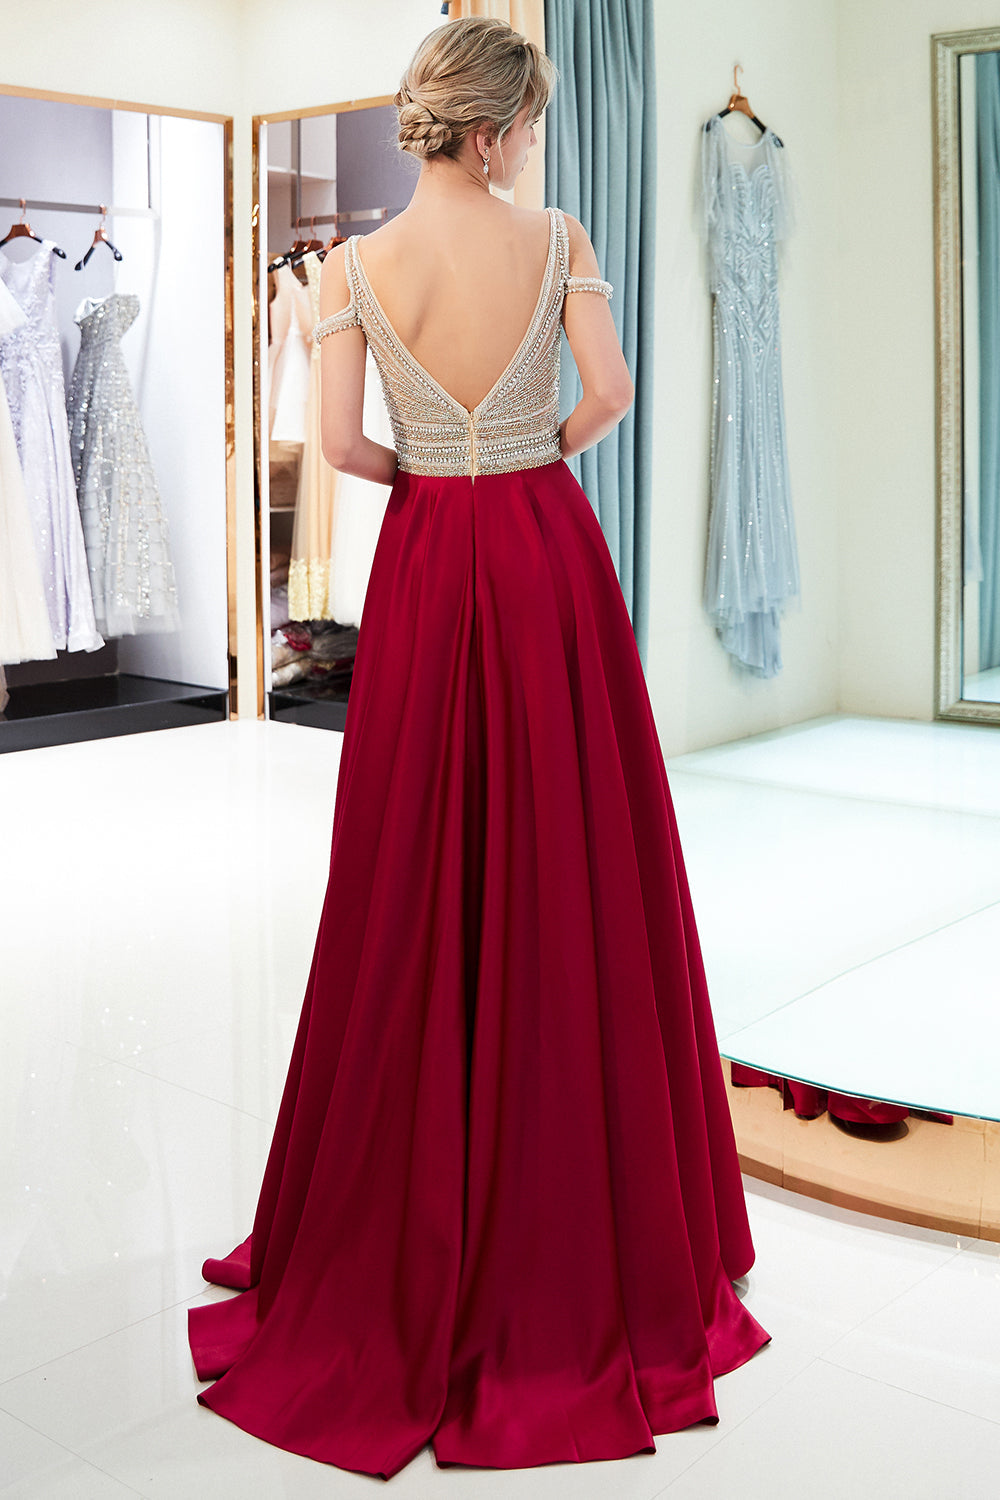 V-Neck Sleeveless Red Evening Dresses | Sexy Crystal Open Back Prom Dress